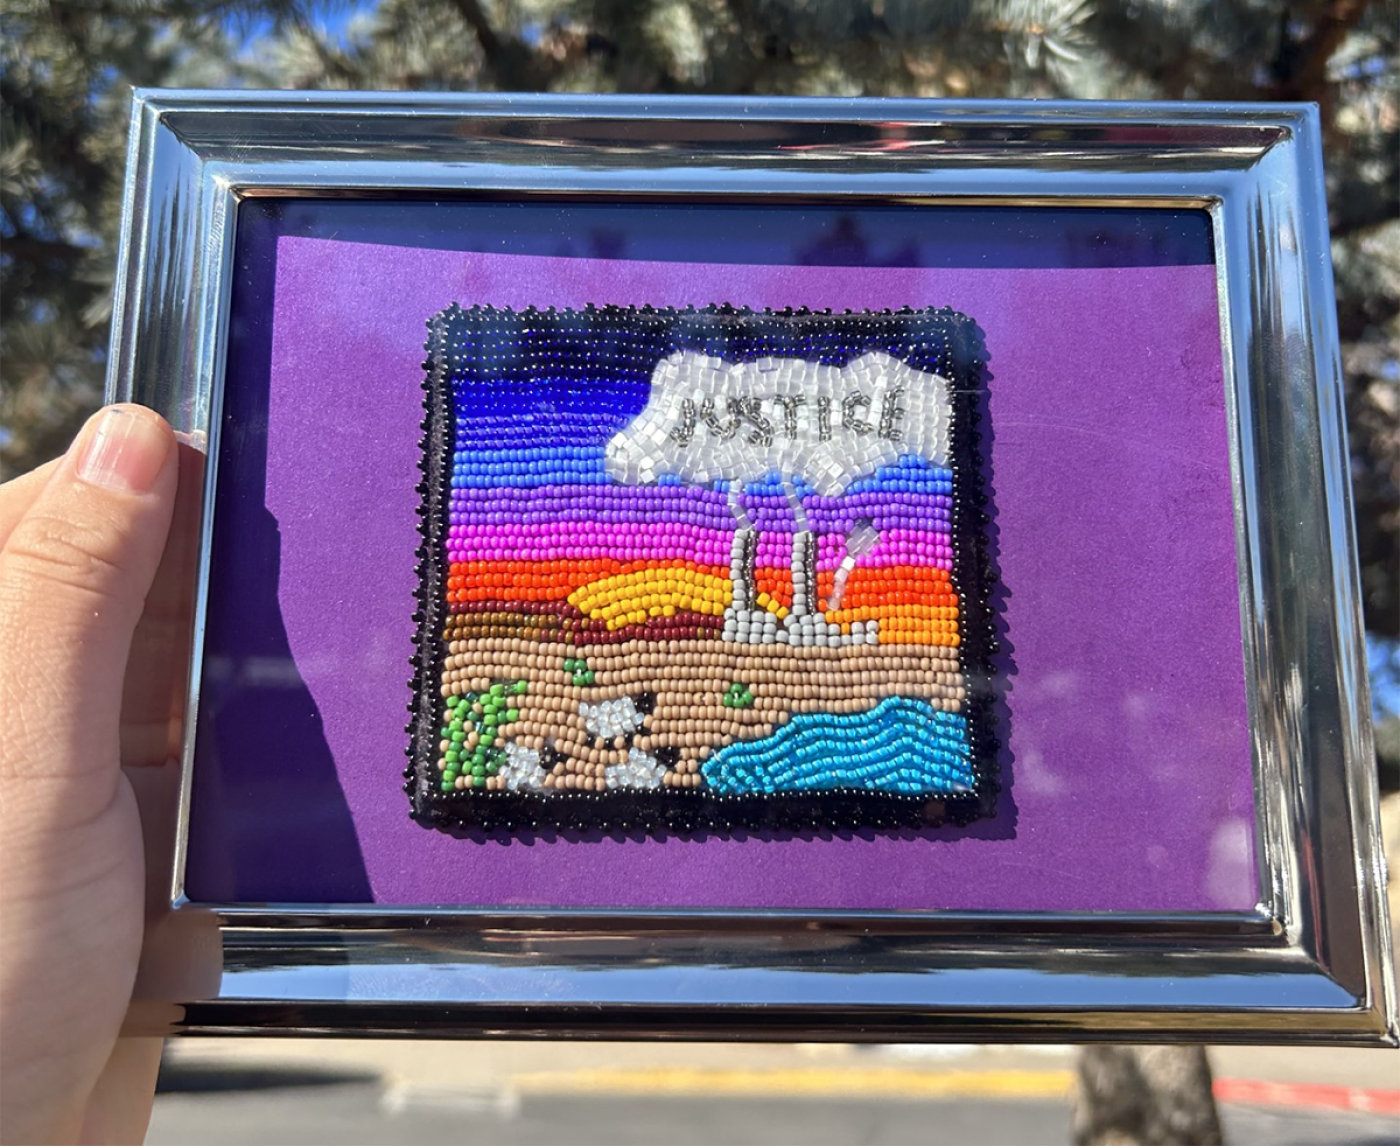 Beadwork landscape of a sunset with sheep grazing by a pool of water in the foreground. In the background an industrial building with tall smokestacks emits a plume of smoke which reads "INJUSTICE."